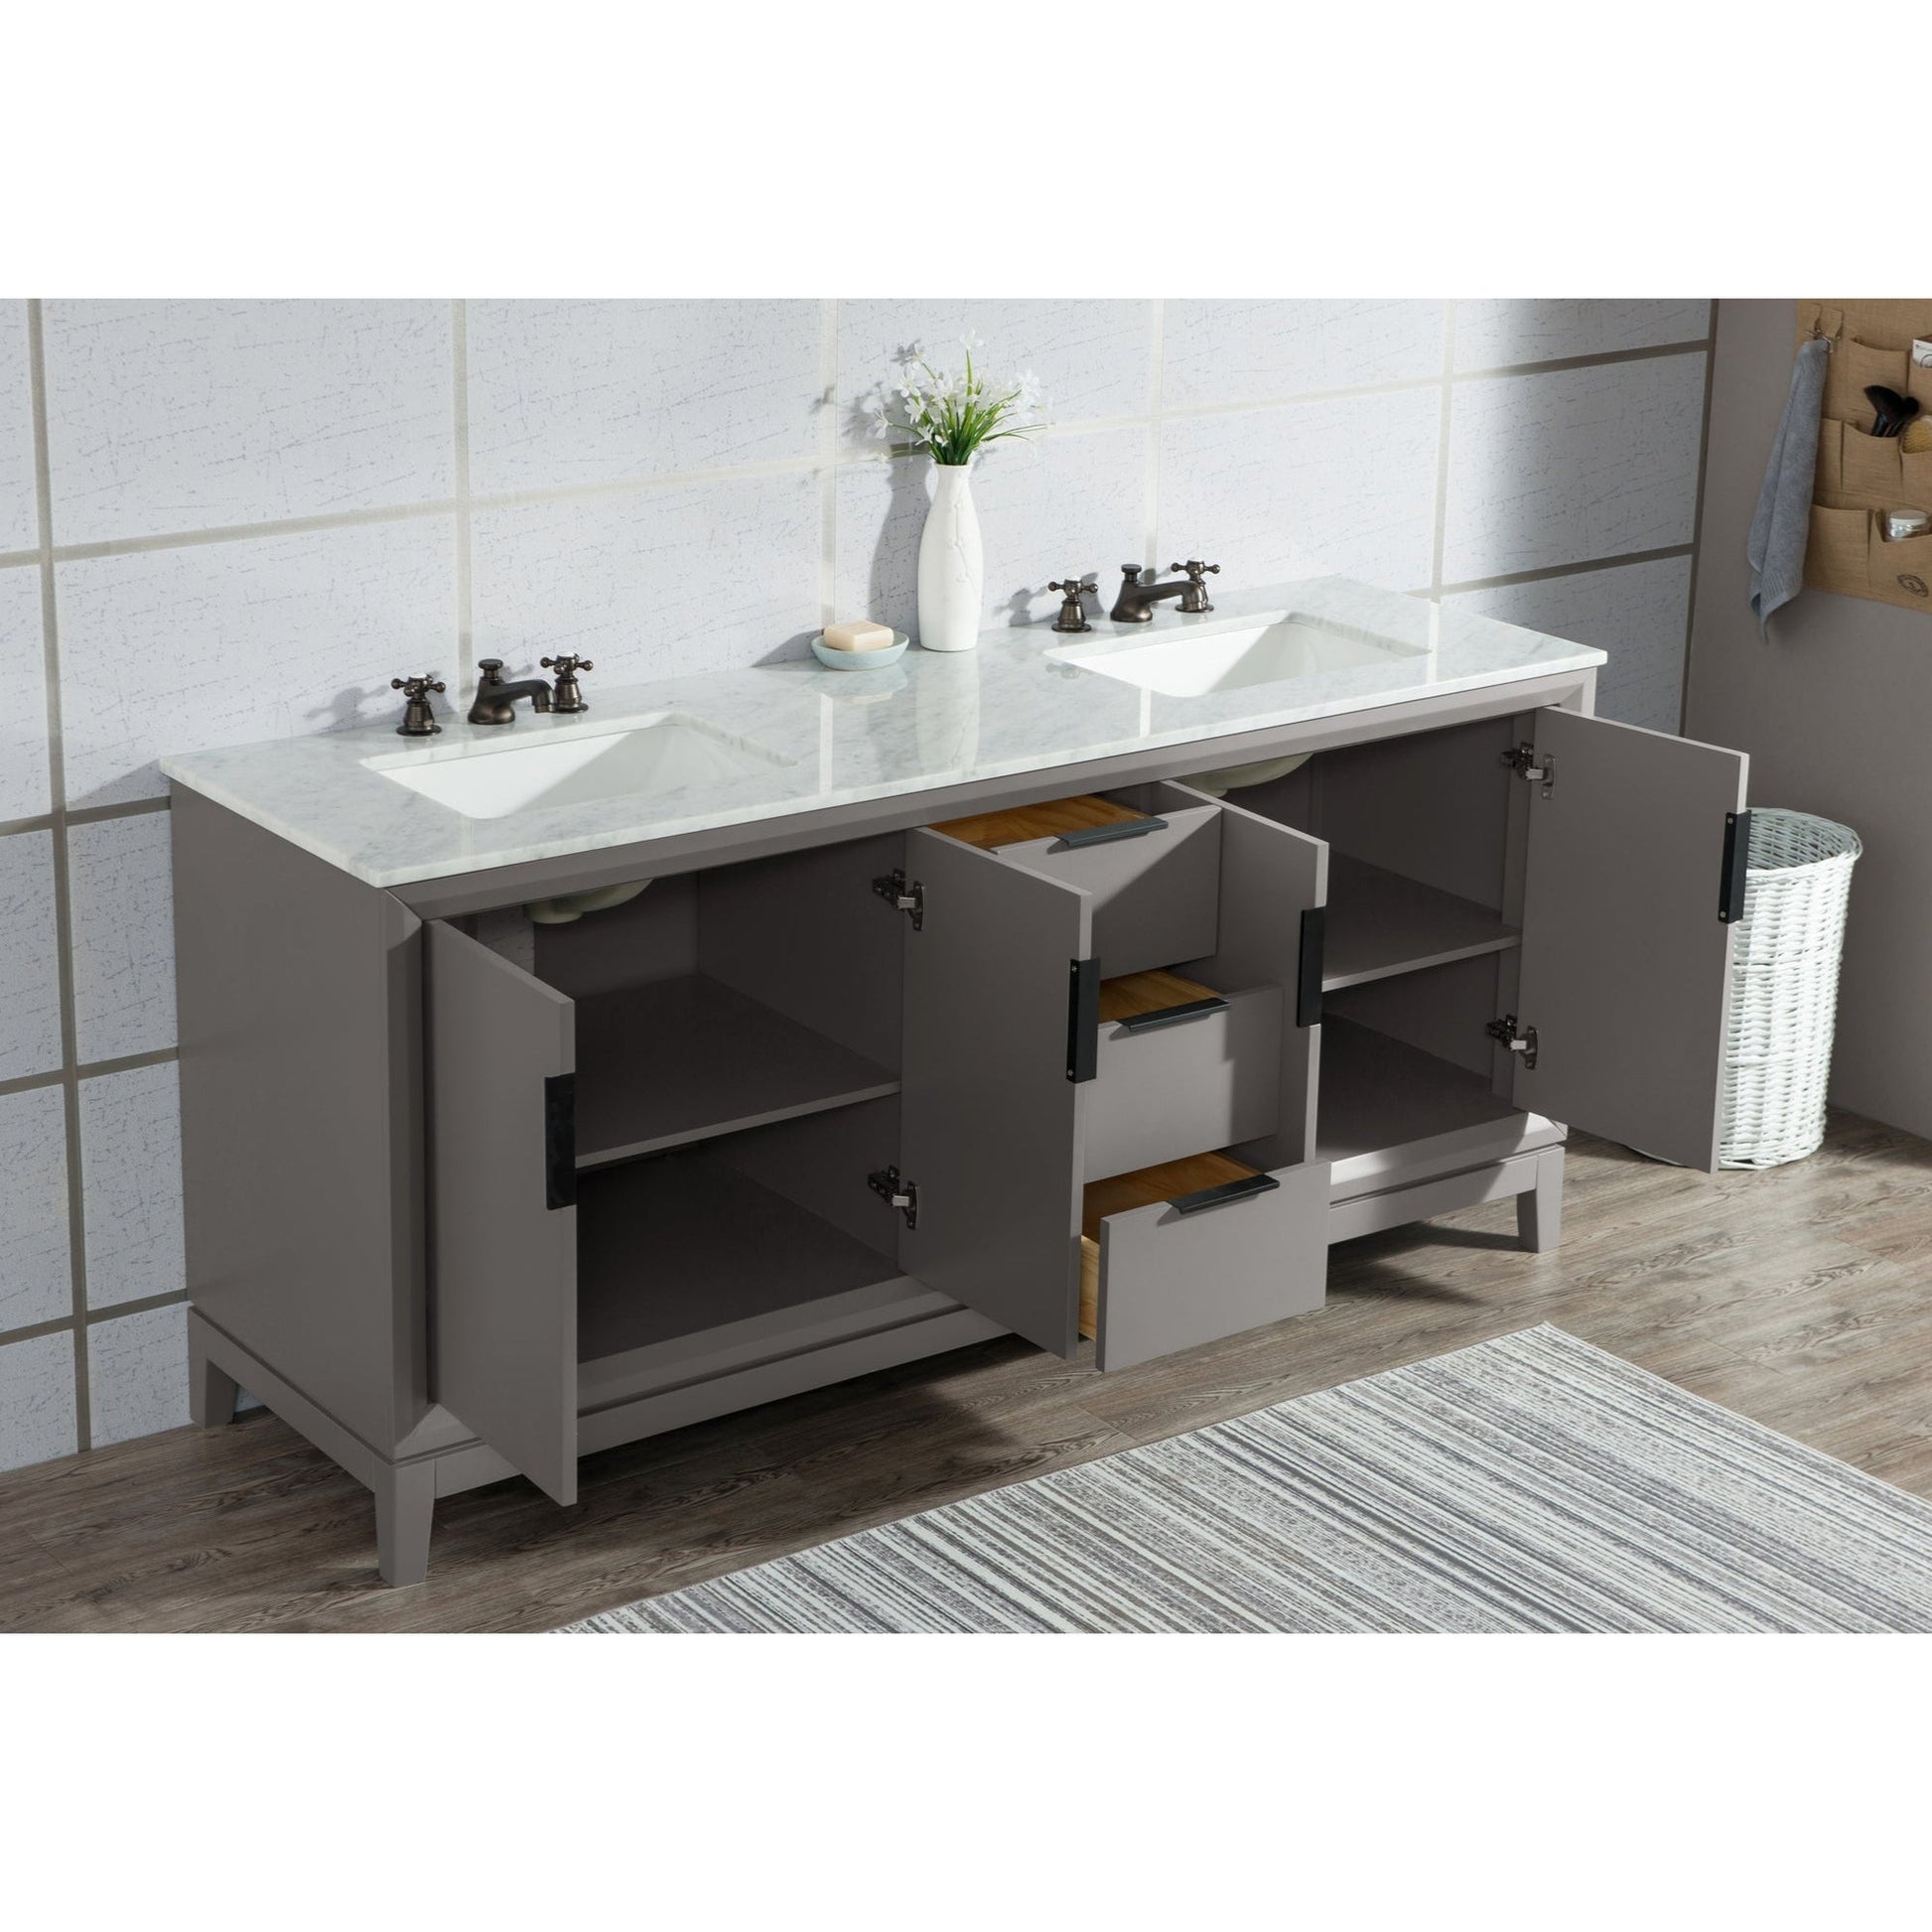 Water Creation Elizabeth 72" Double Sink Carrara White Marble Vanity In Cashmere Grey With Matching Mirror